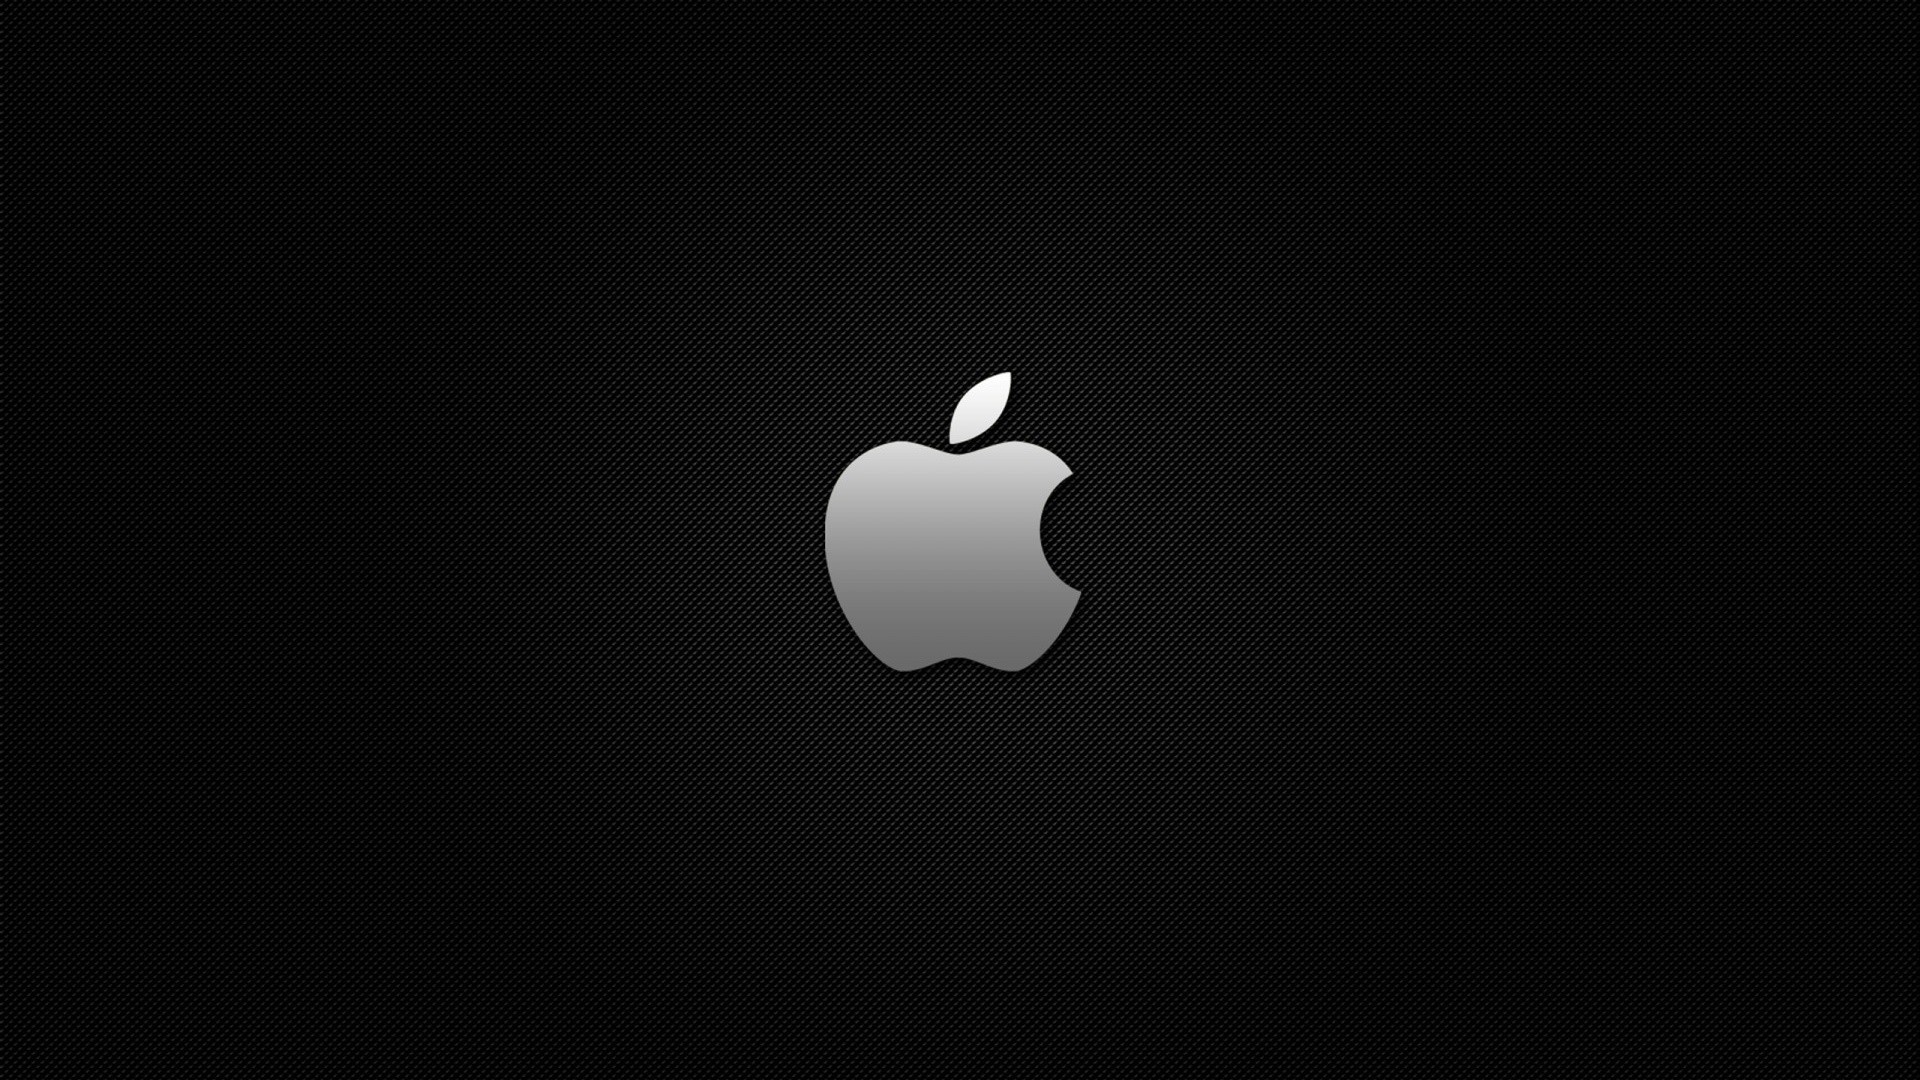 1920x1080 Related For Butterfly White Black Background. Black Apple Logo Wallpapers